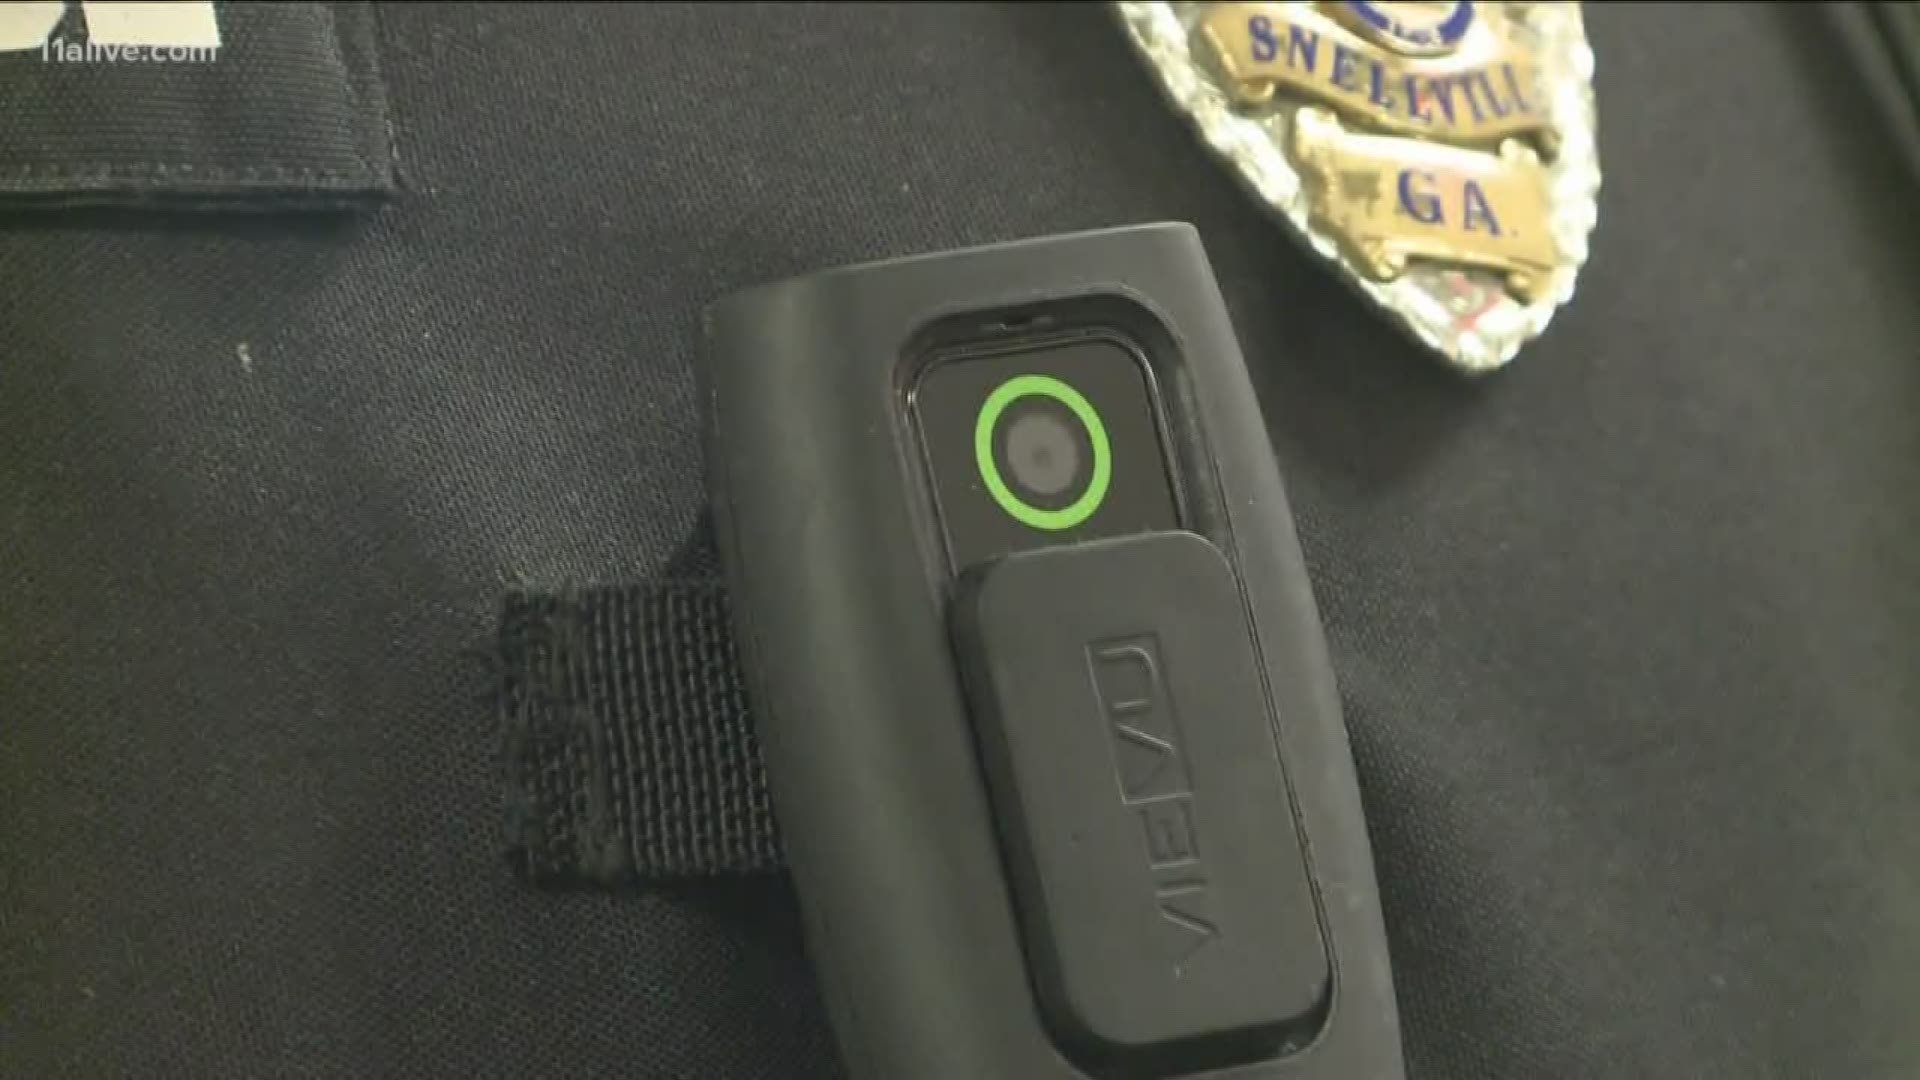 The move also comes after APD changed its policy on body cameras.